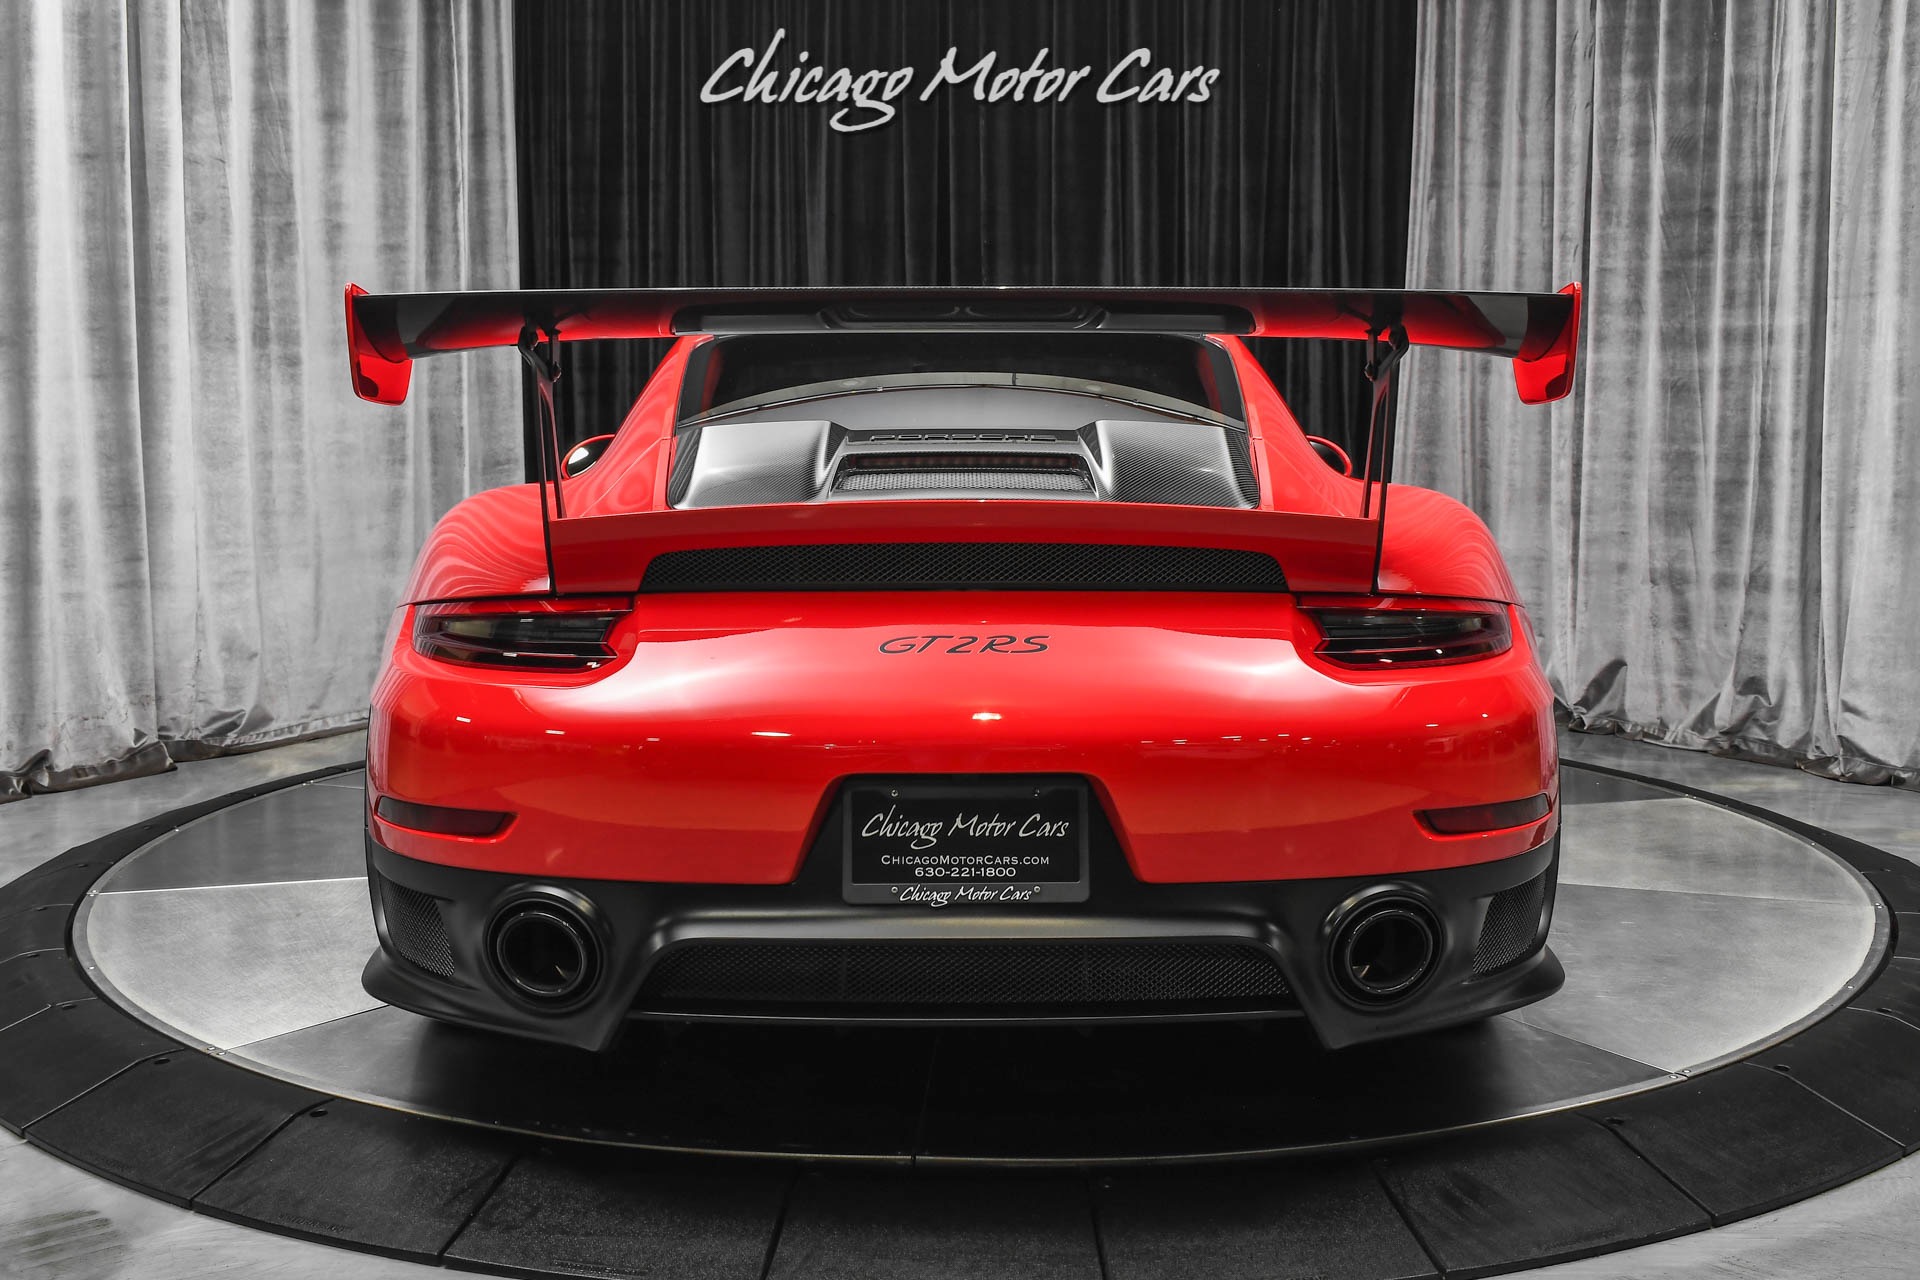 Used-2019-Porsche-911-GT2-RS-Weissach-Pkg-ONLY-4K-Miles-FULL-PPF--Ceramic-Front-Lift-LOADED